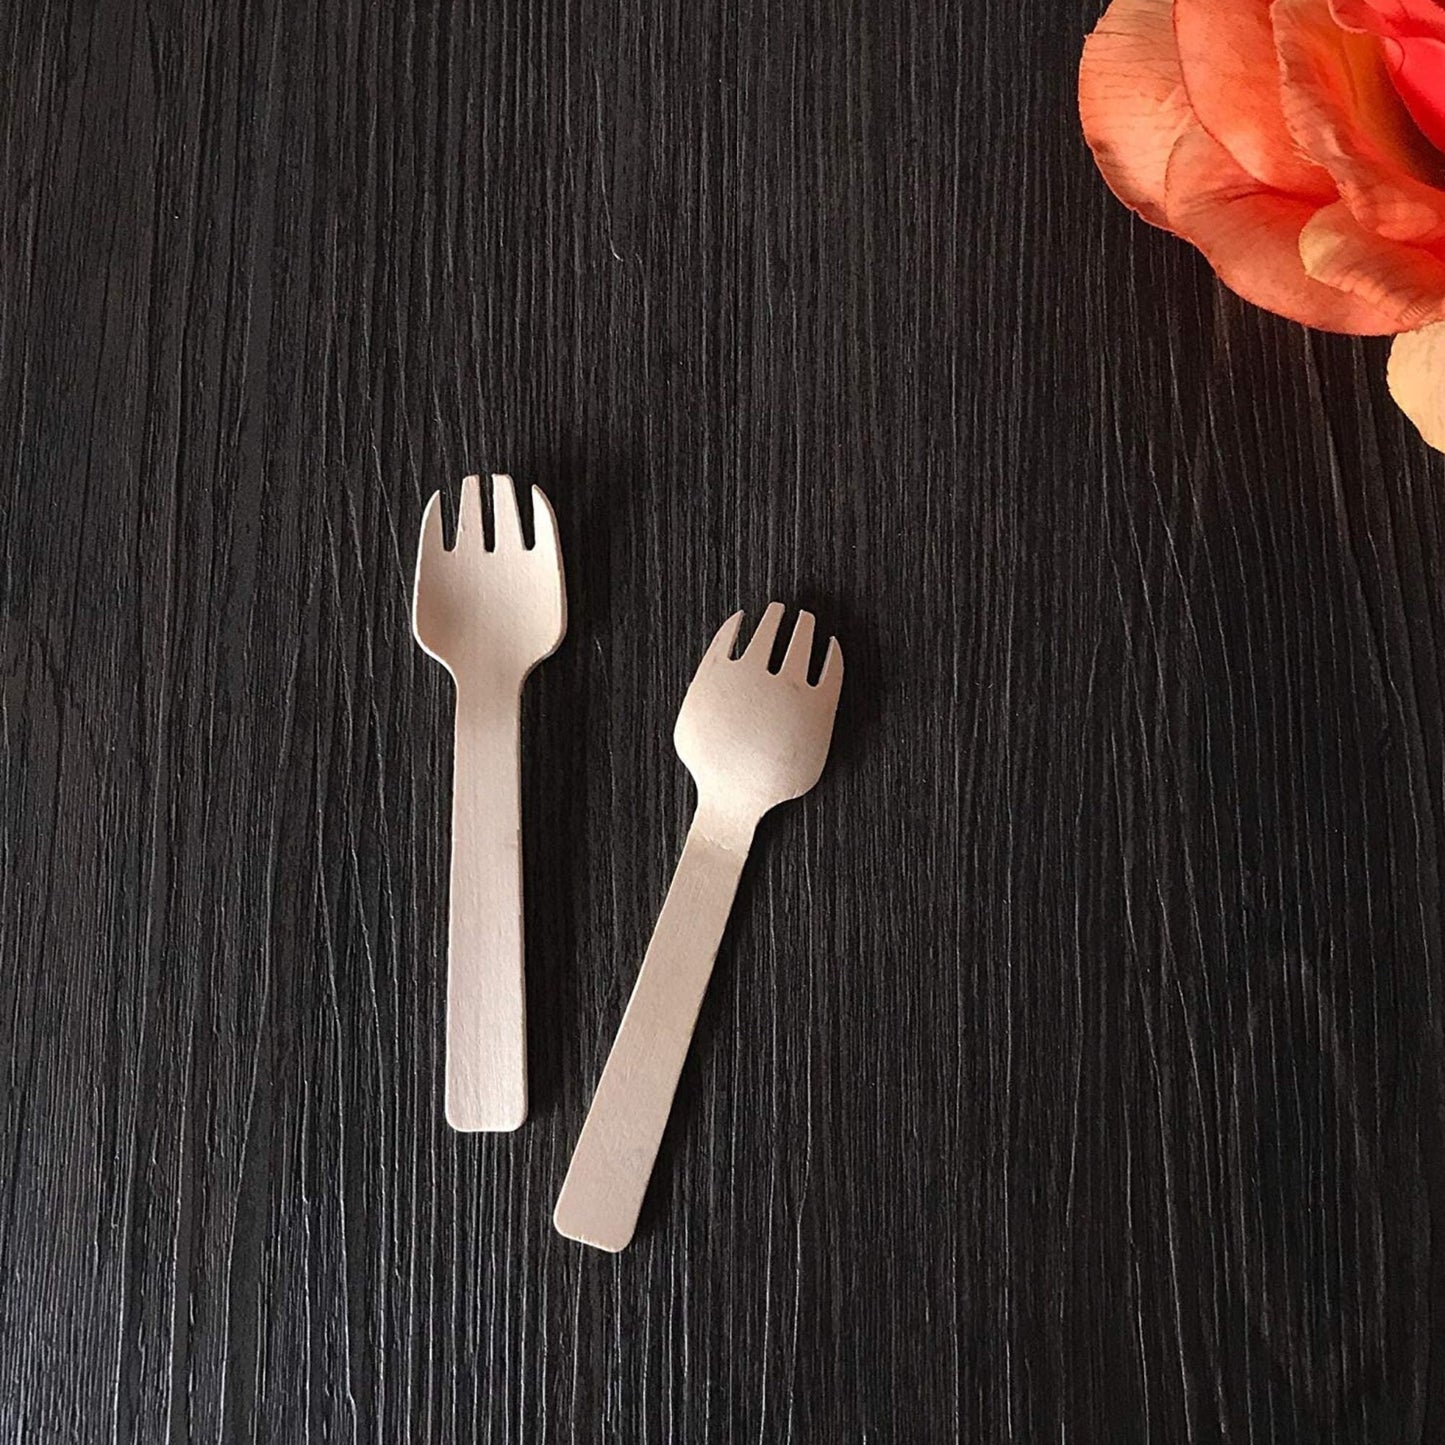 Wooden Forks & Spoons for Charcuterie Board